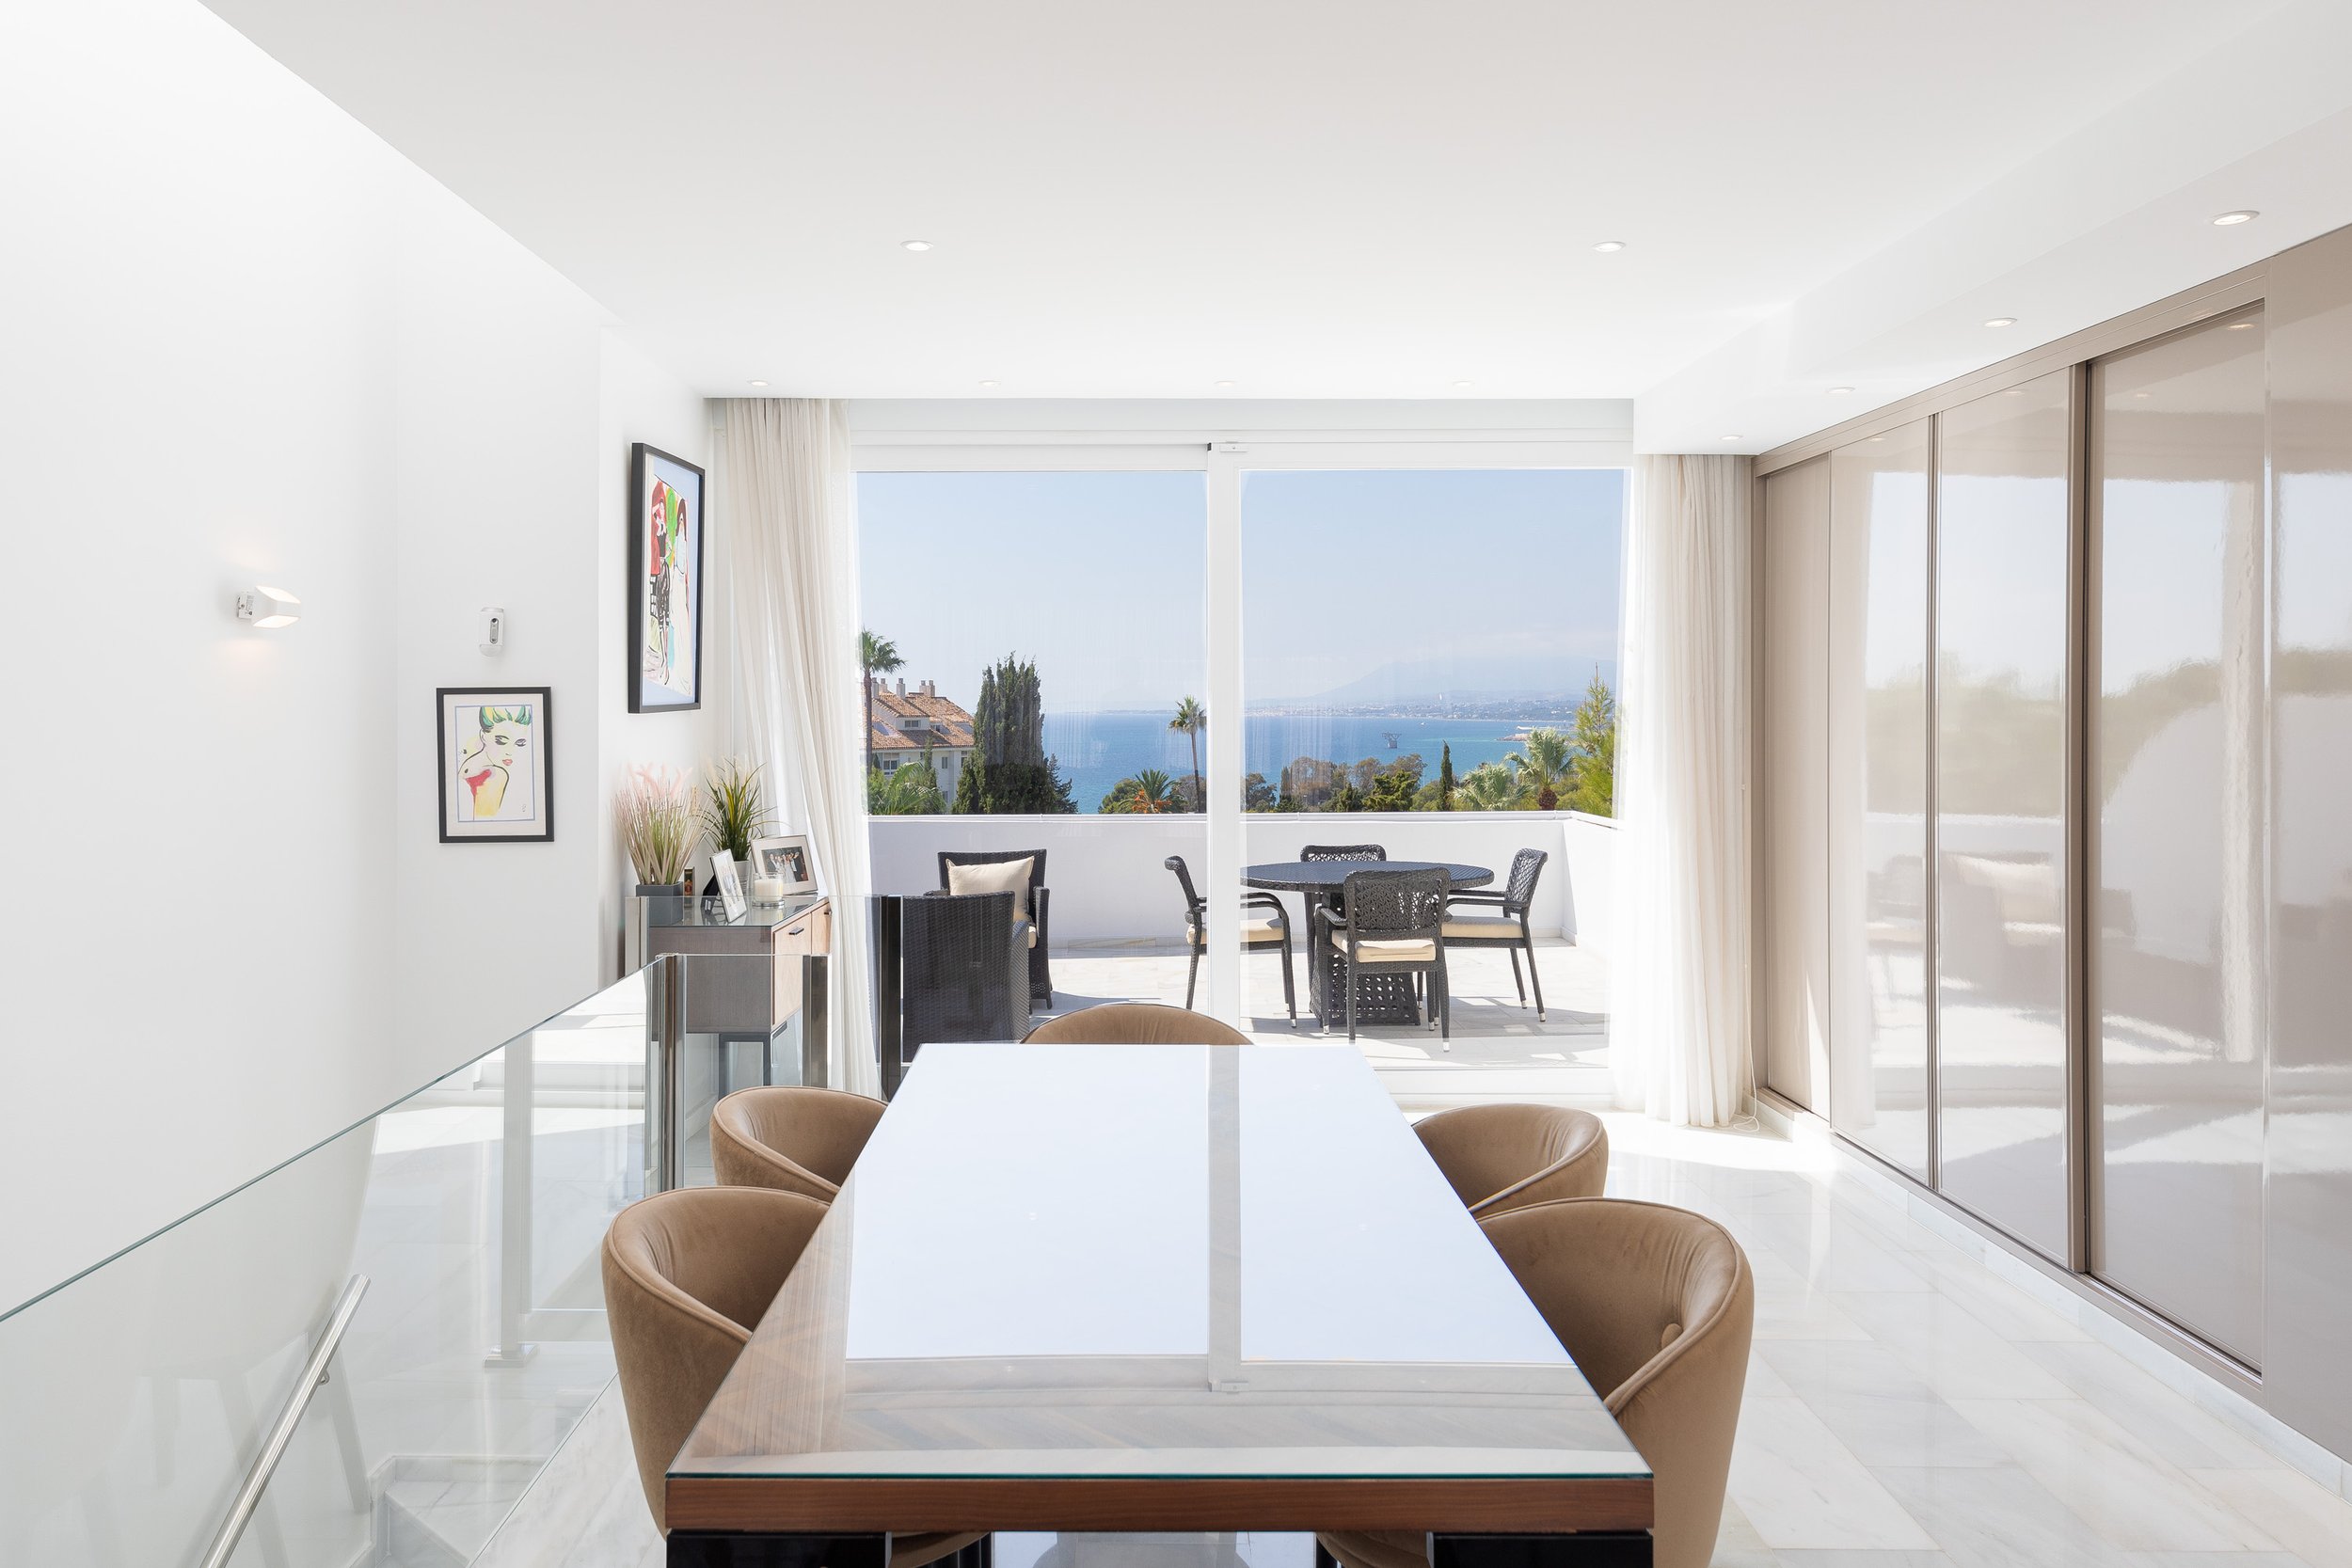 for-sale-renovated-three-bedroom-duplex-penthouse-rio-real-marbella-fs8795-11.jpg